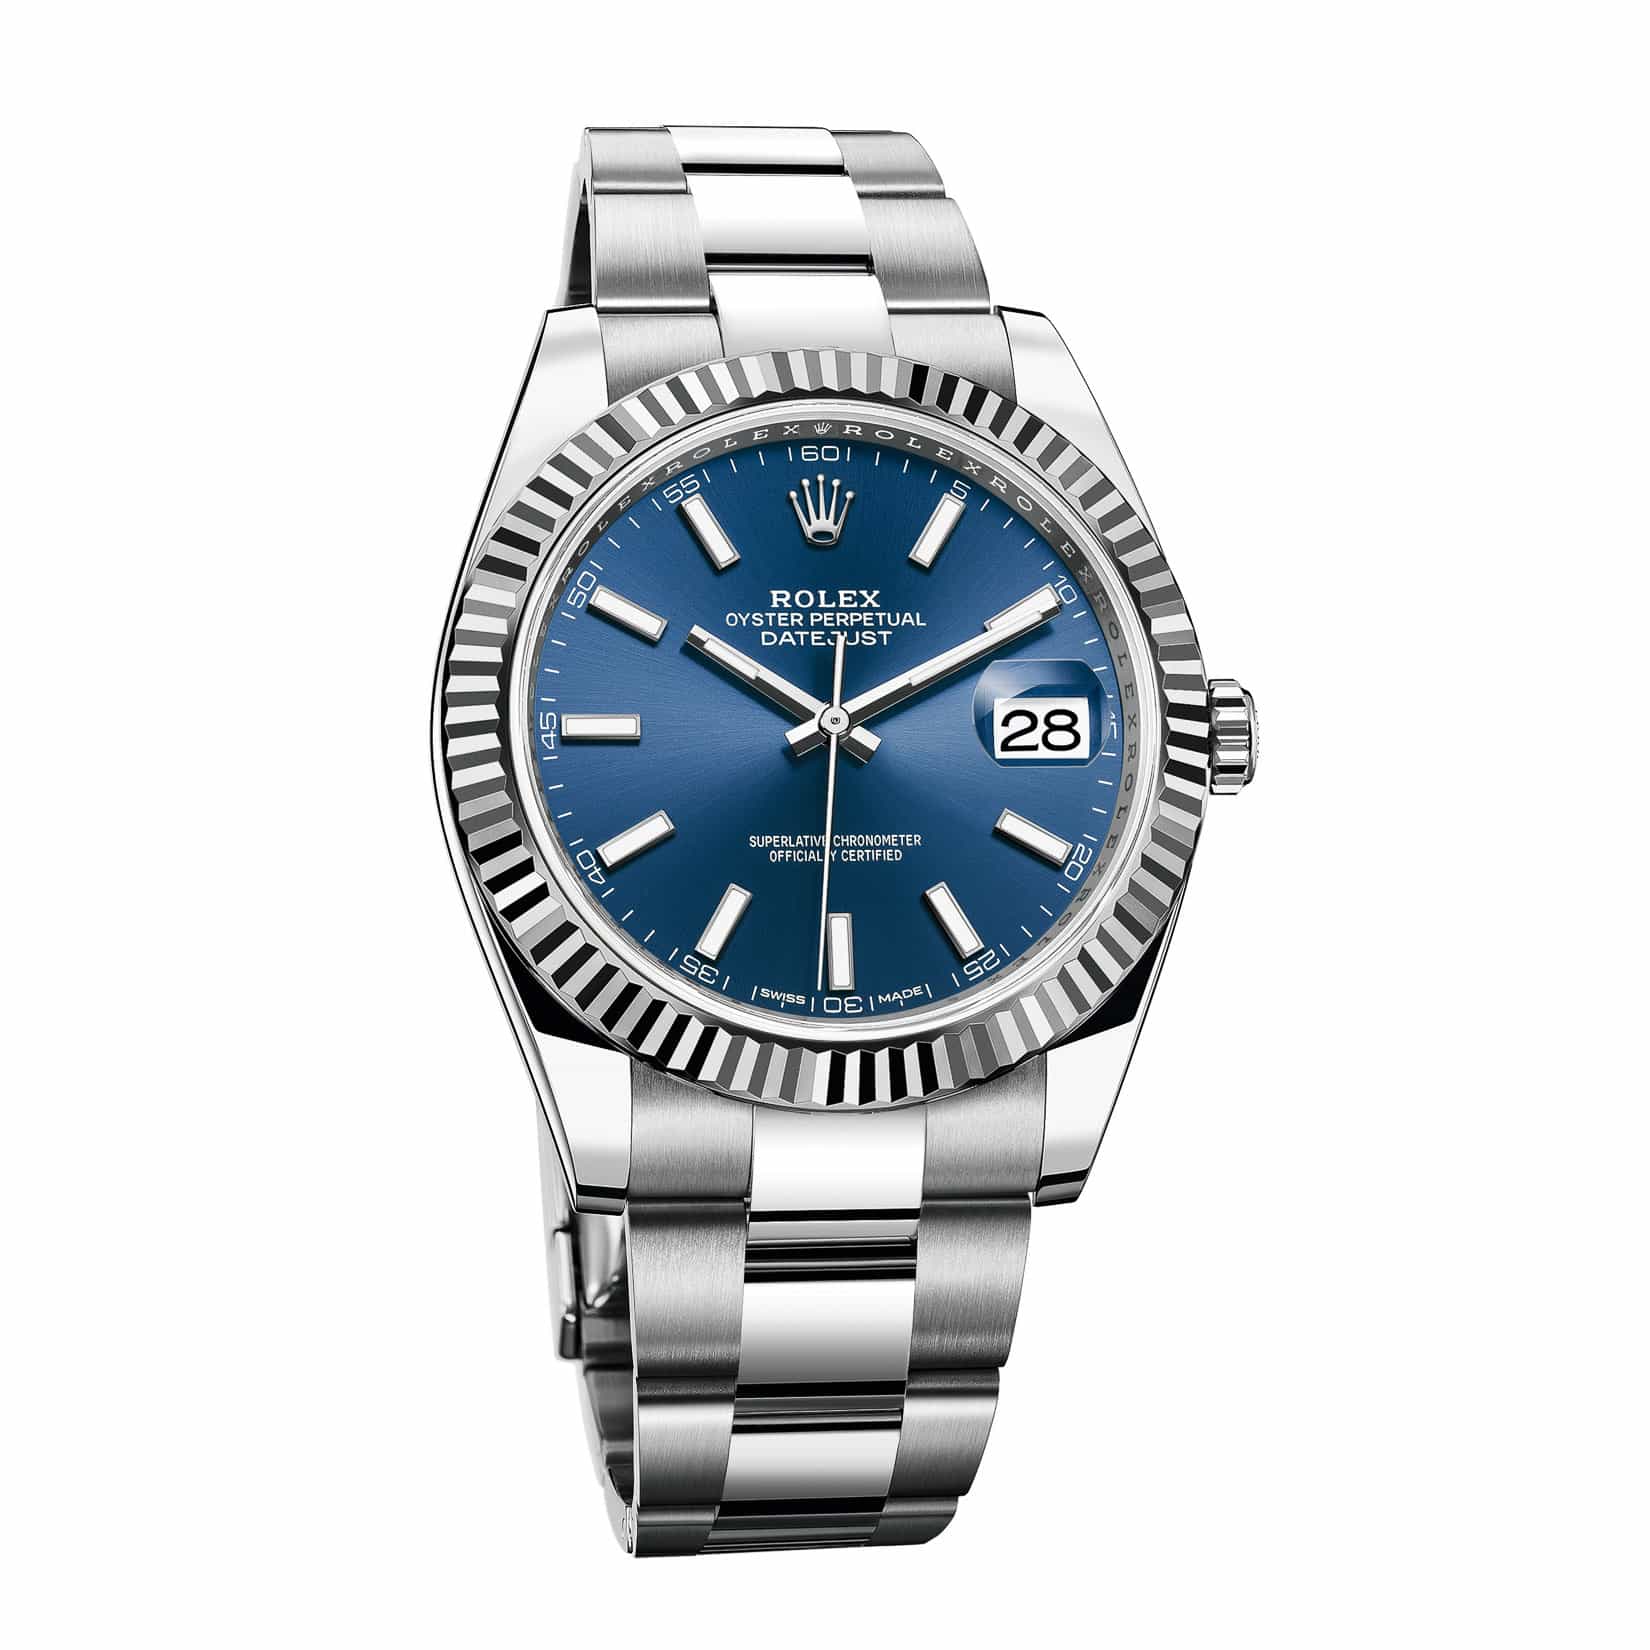 Vedligeholdelse ozon motto The New Rolex Datejust 41 in Steel and White Gold - BaselWorld 2017